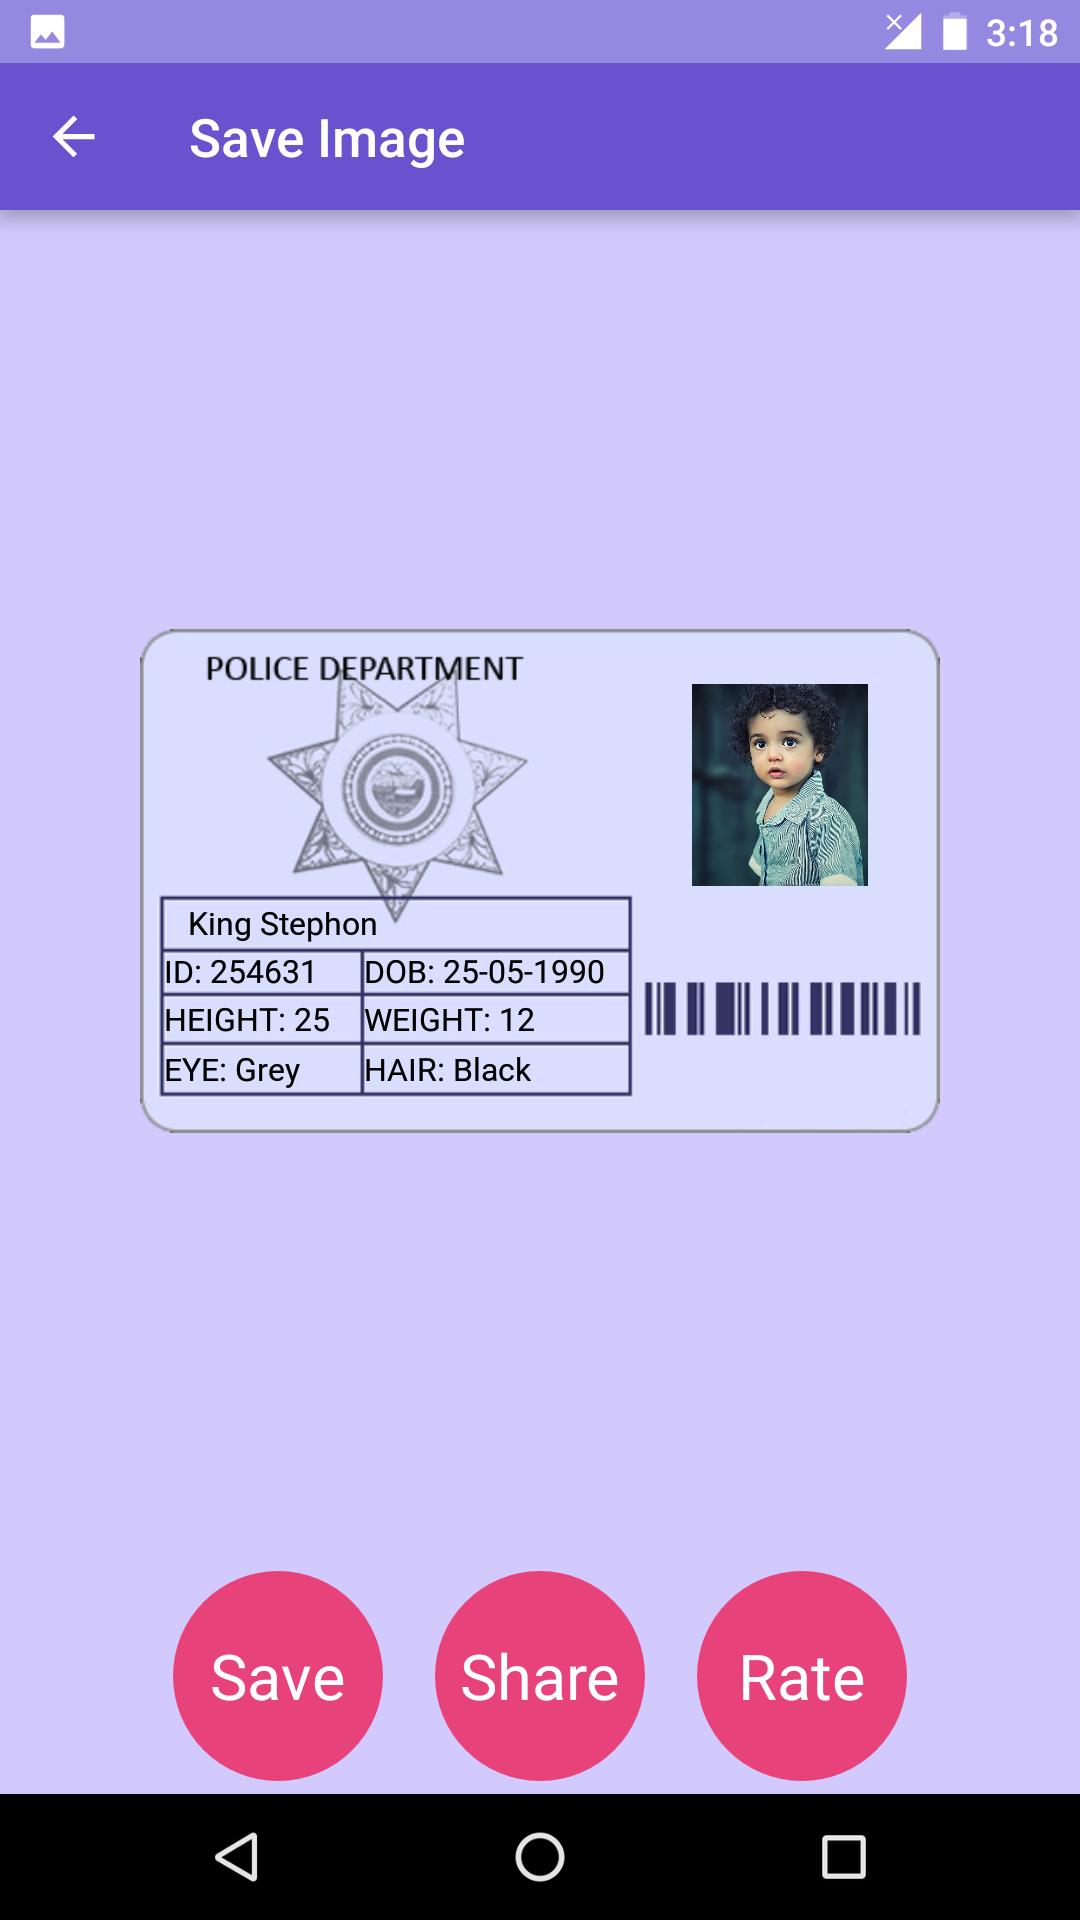 using a fake ID to get voice chat in roblox 